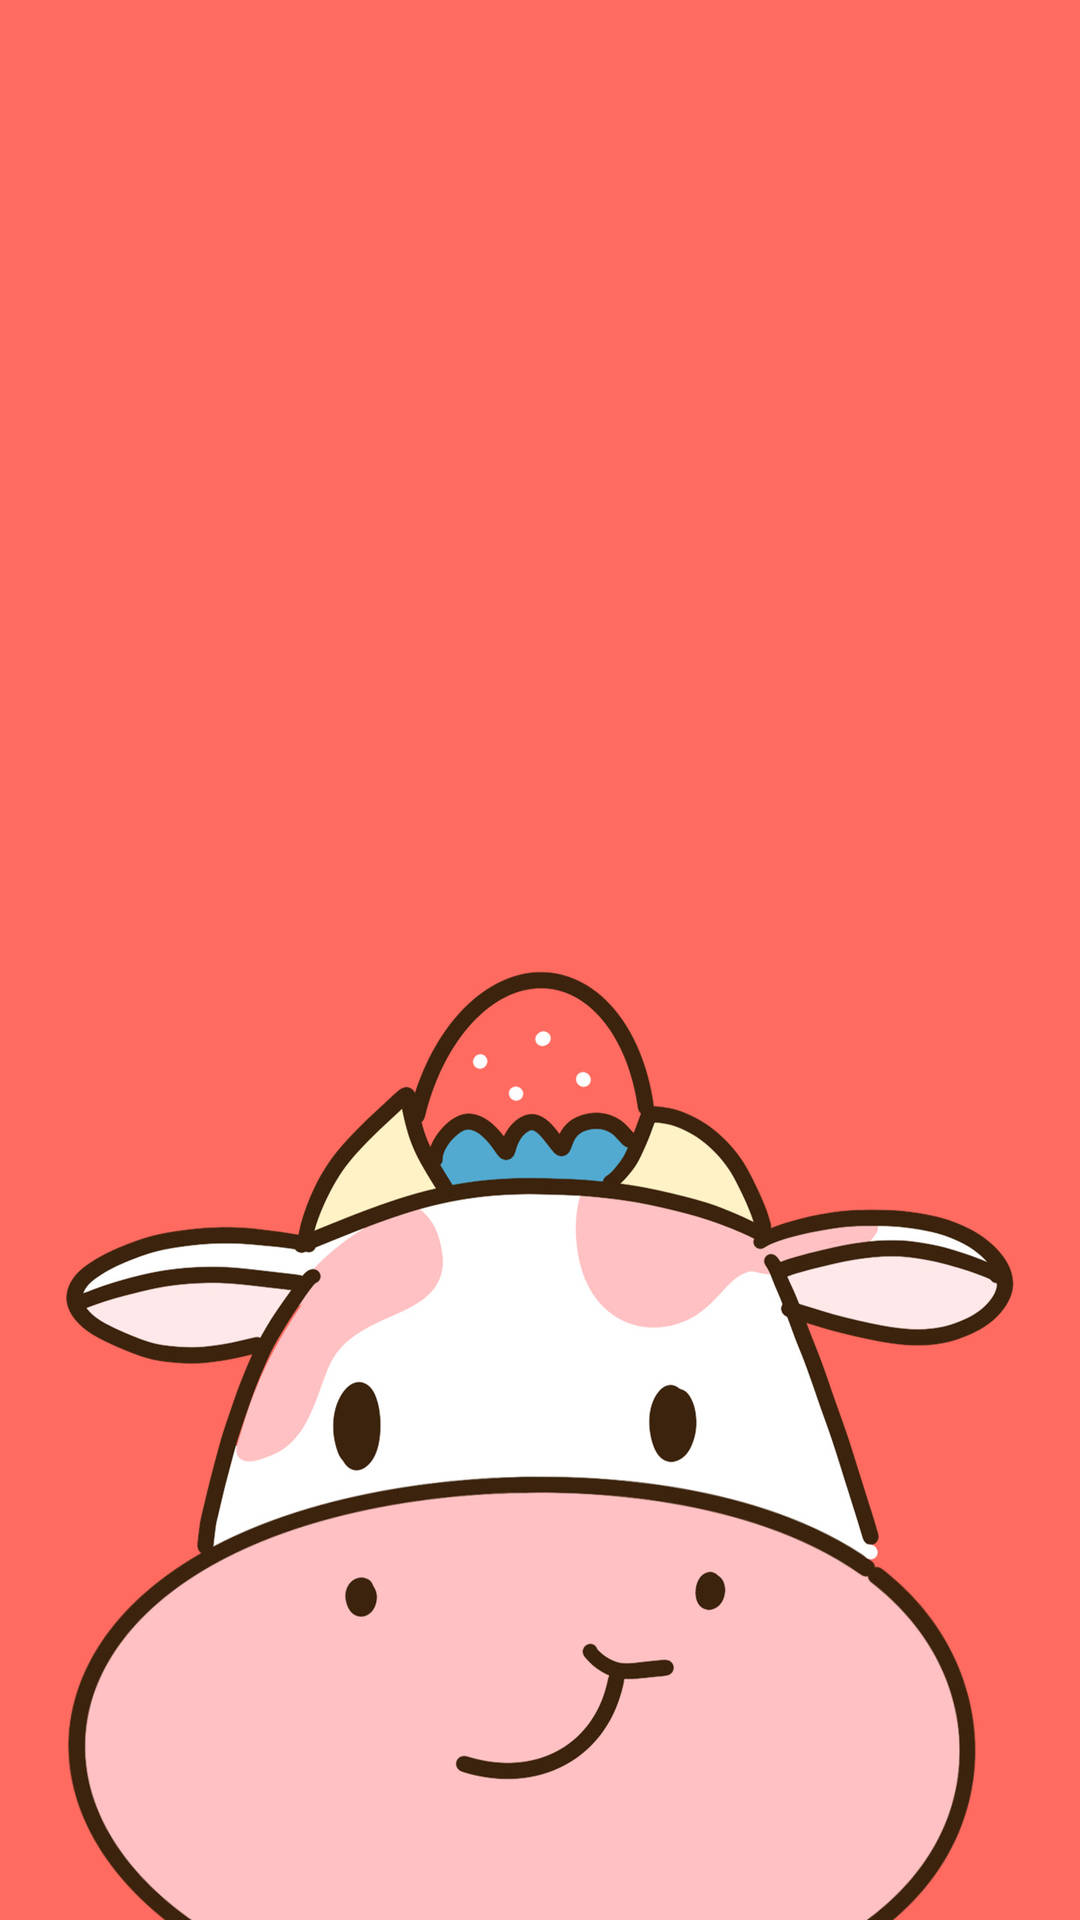 Strawberry cow  Cow drawing Cow wallpaper Cow cartoon drawing